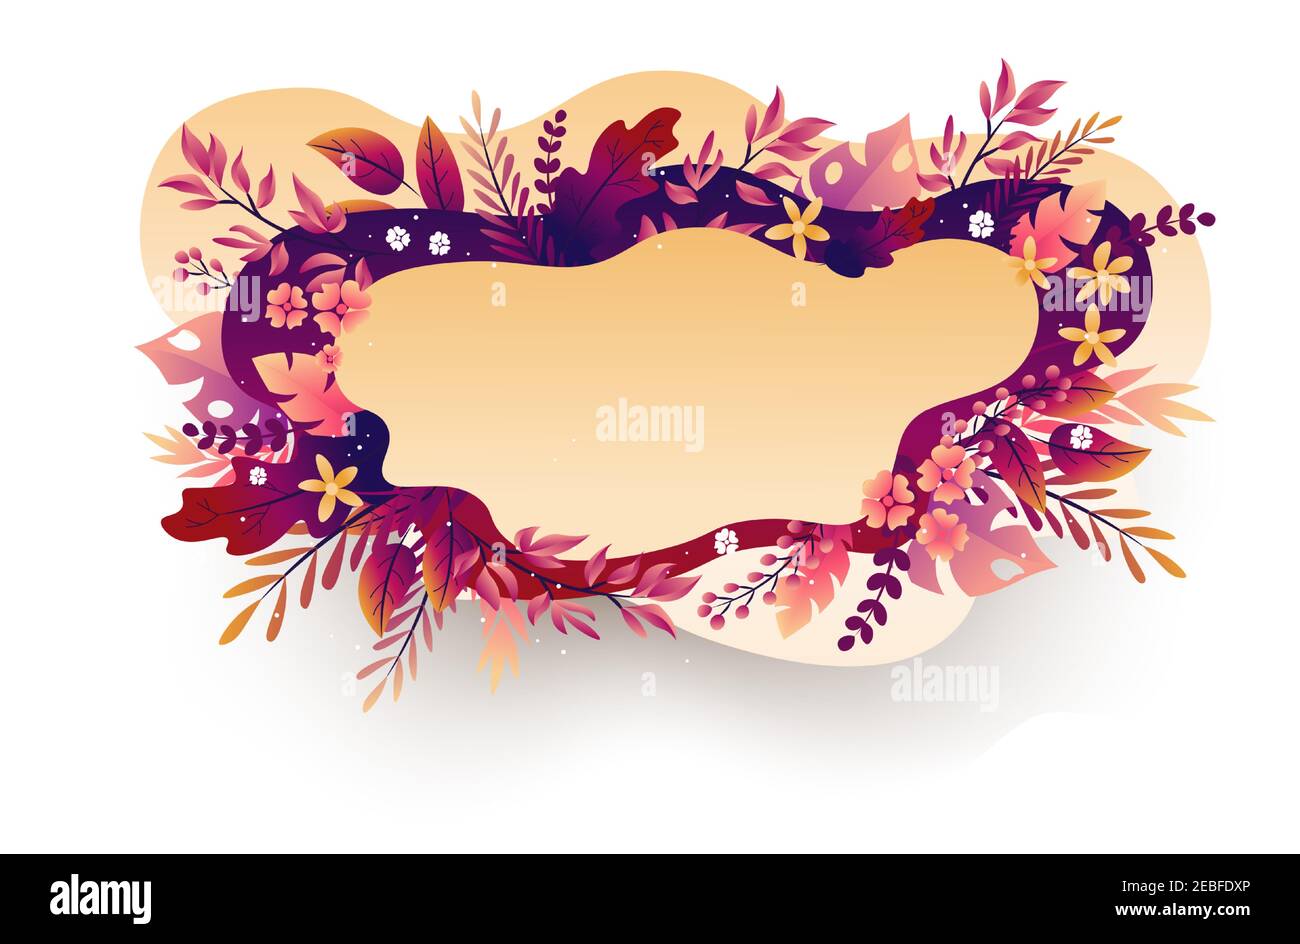 Seasonal autumn hand drawn frame vector background.Fall decorative border with dried leaves,acorns,berries and place for text.Foliage backdrop with Stock Vector